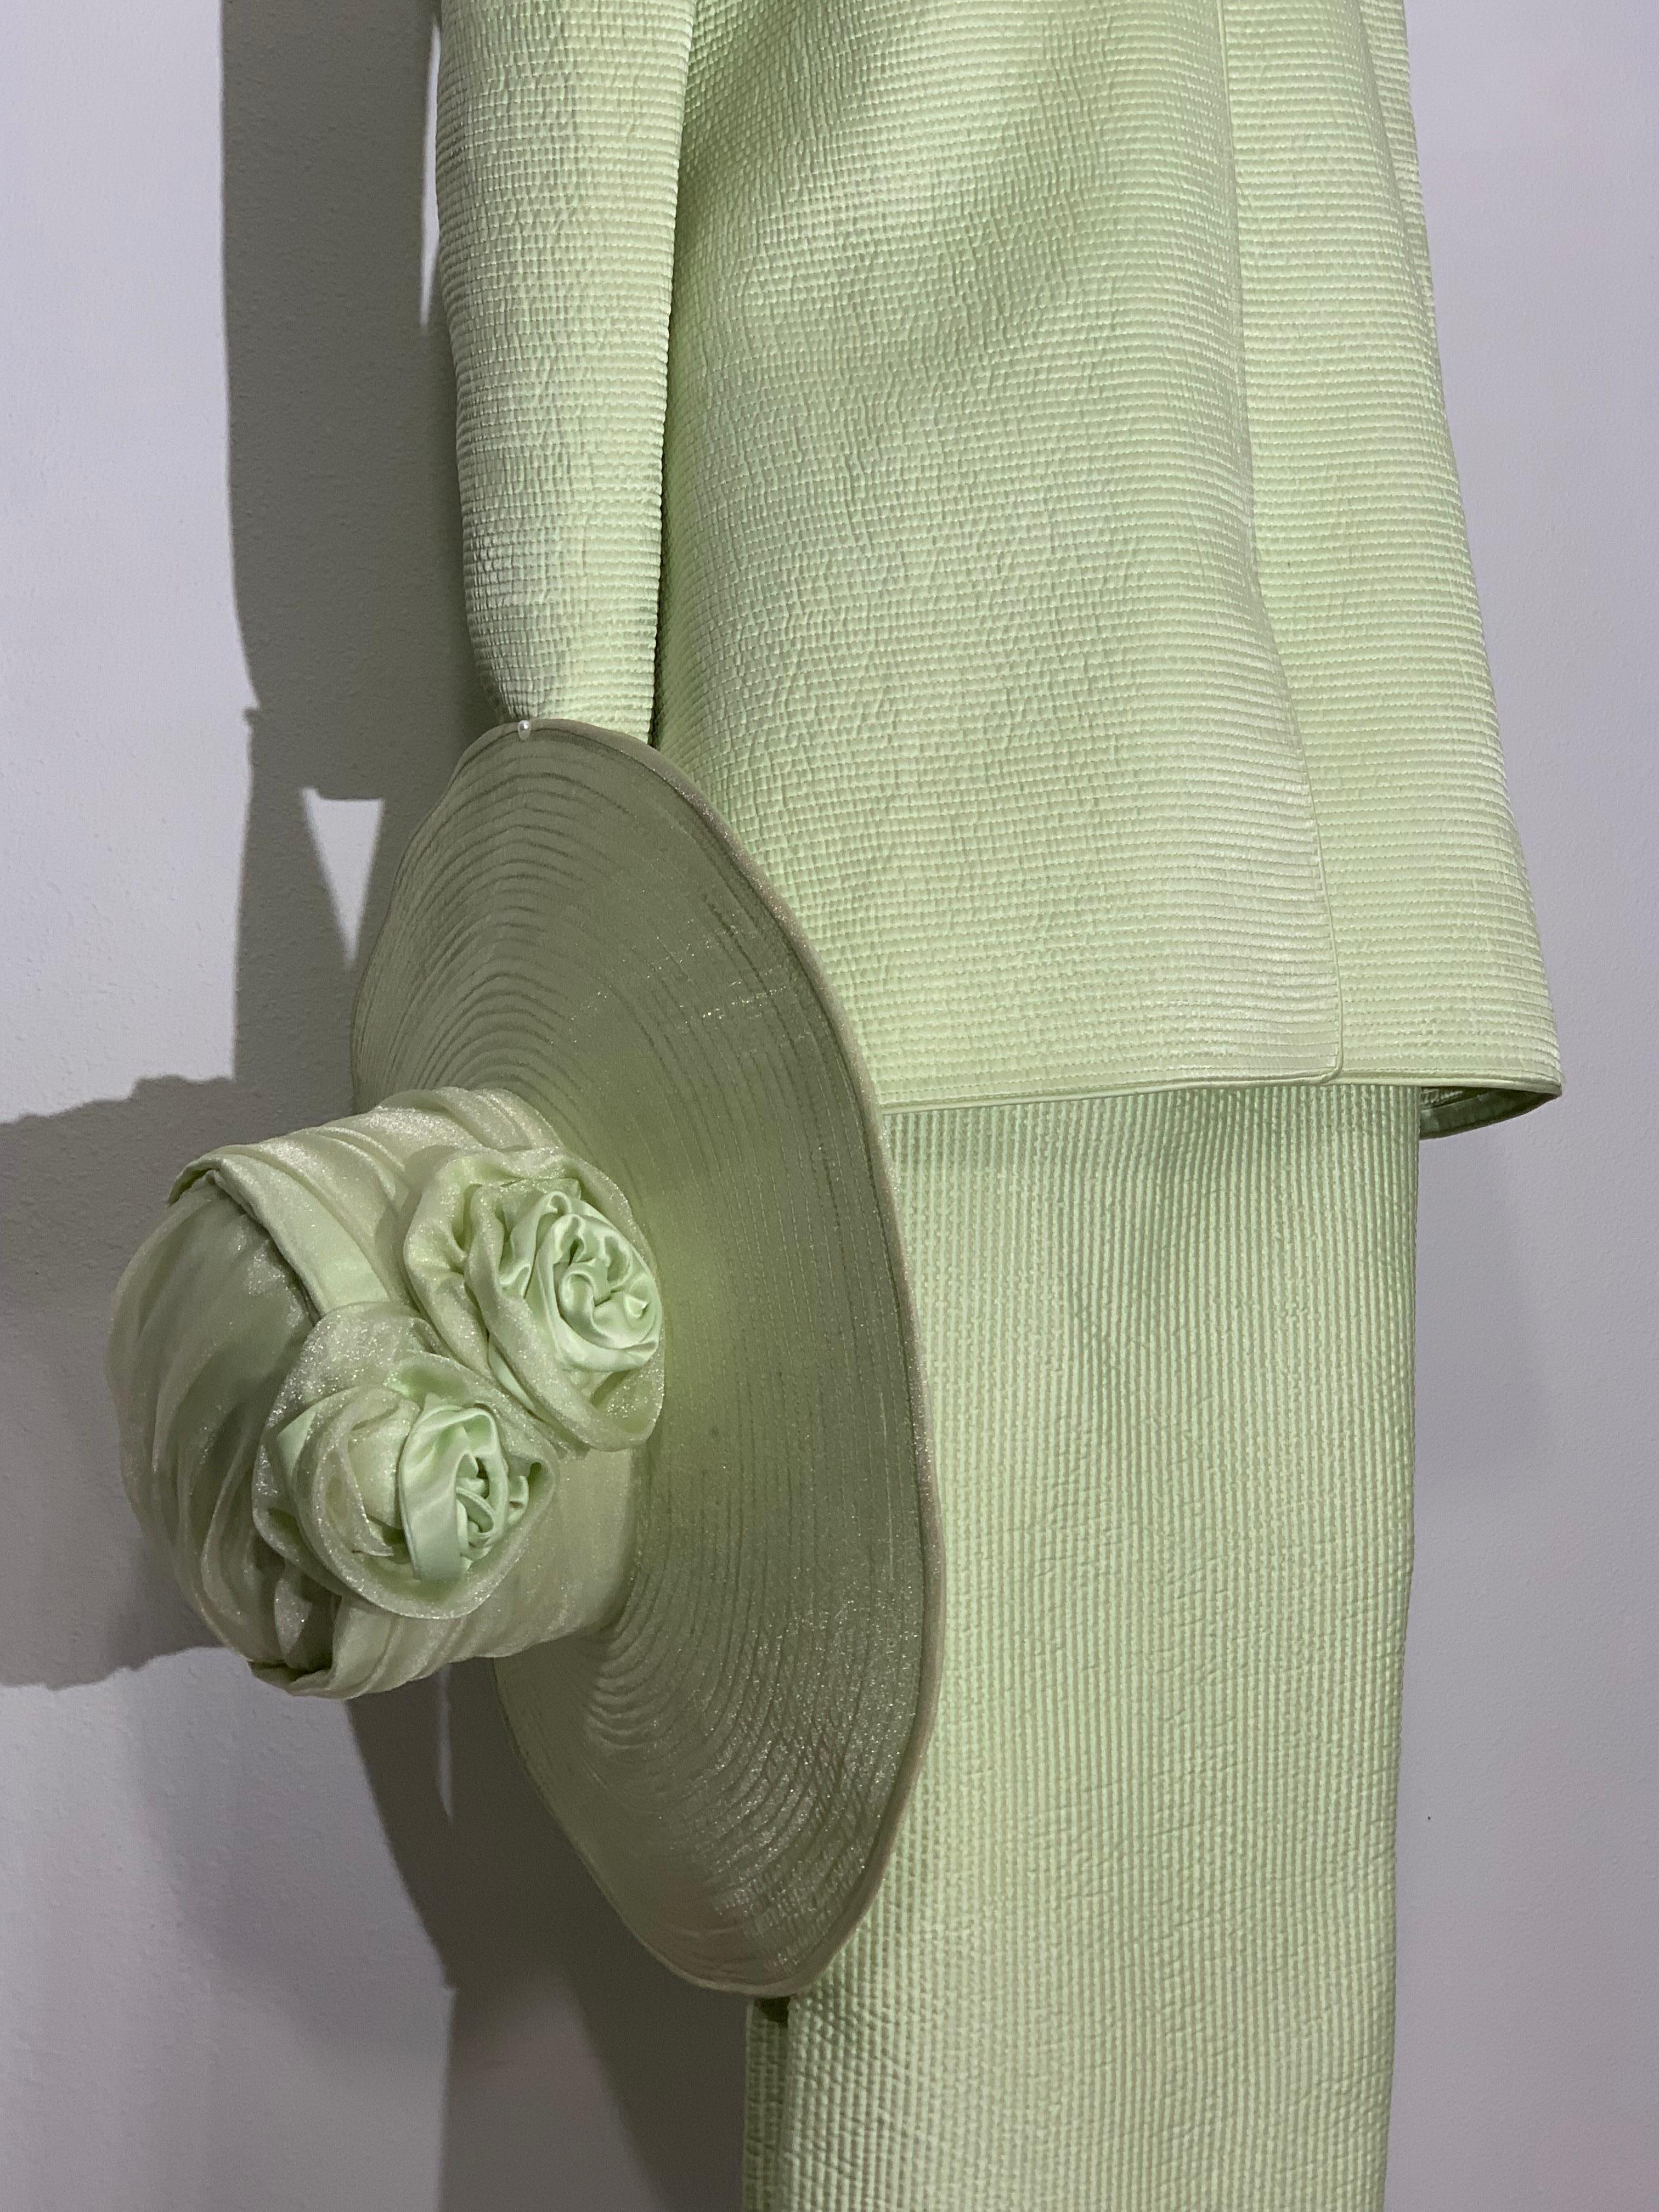 3 Piece Couture Quality Celadon Green Silk Quilted Pantsuit w Stovepipe Leg, Tunic Jacket and Coordinating Hat: Suit is unlined spring weight with a slightly flared fingertip-length tunic jacket with high band collar. Covered snap closures down